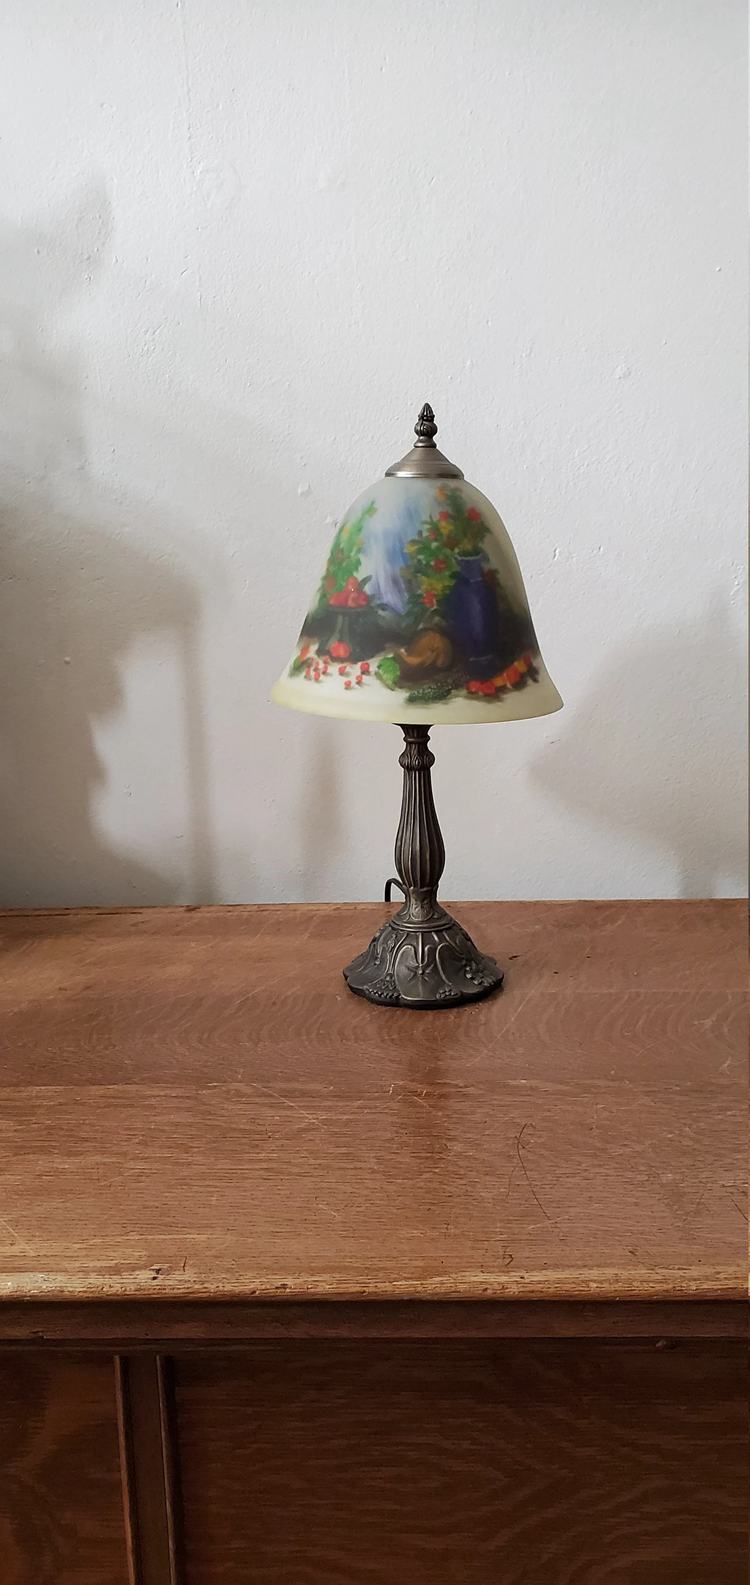 The Reverse Painted Landscape Pairpoint Lamp Shade